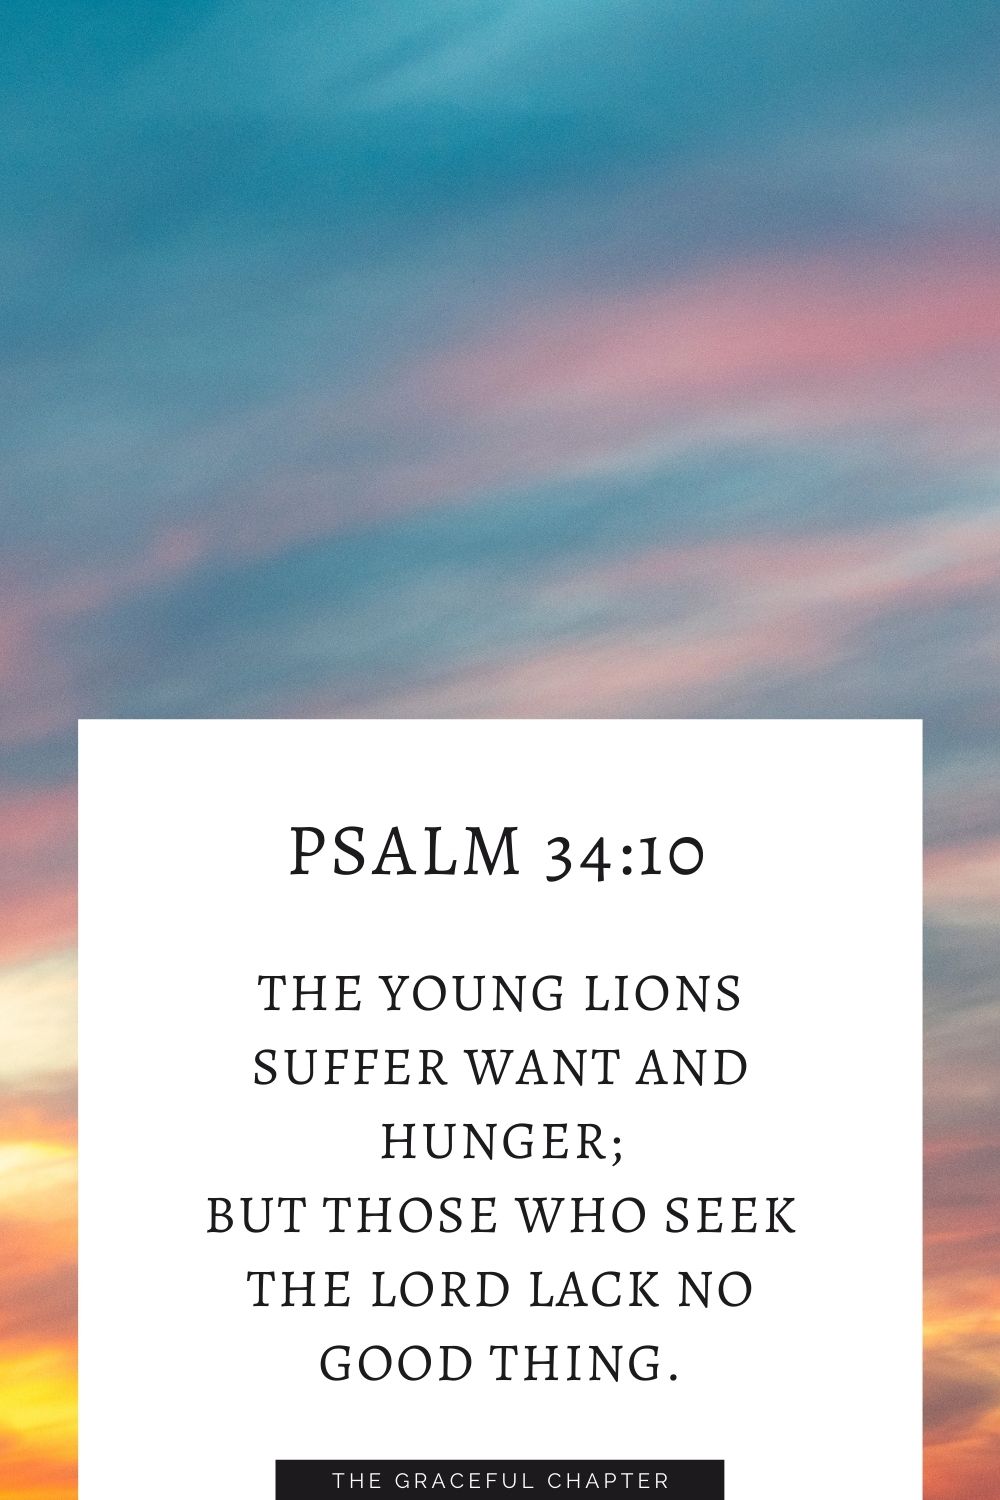 The young lions suffer want and hunger; but those who seek the Lord lack no good thing. Psalm 34:10